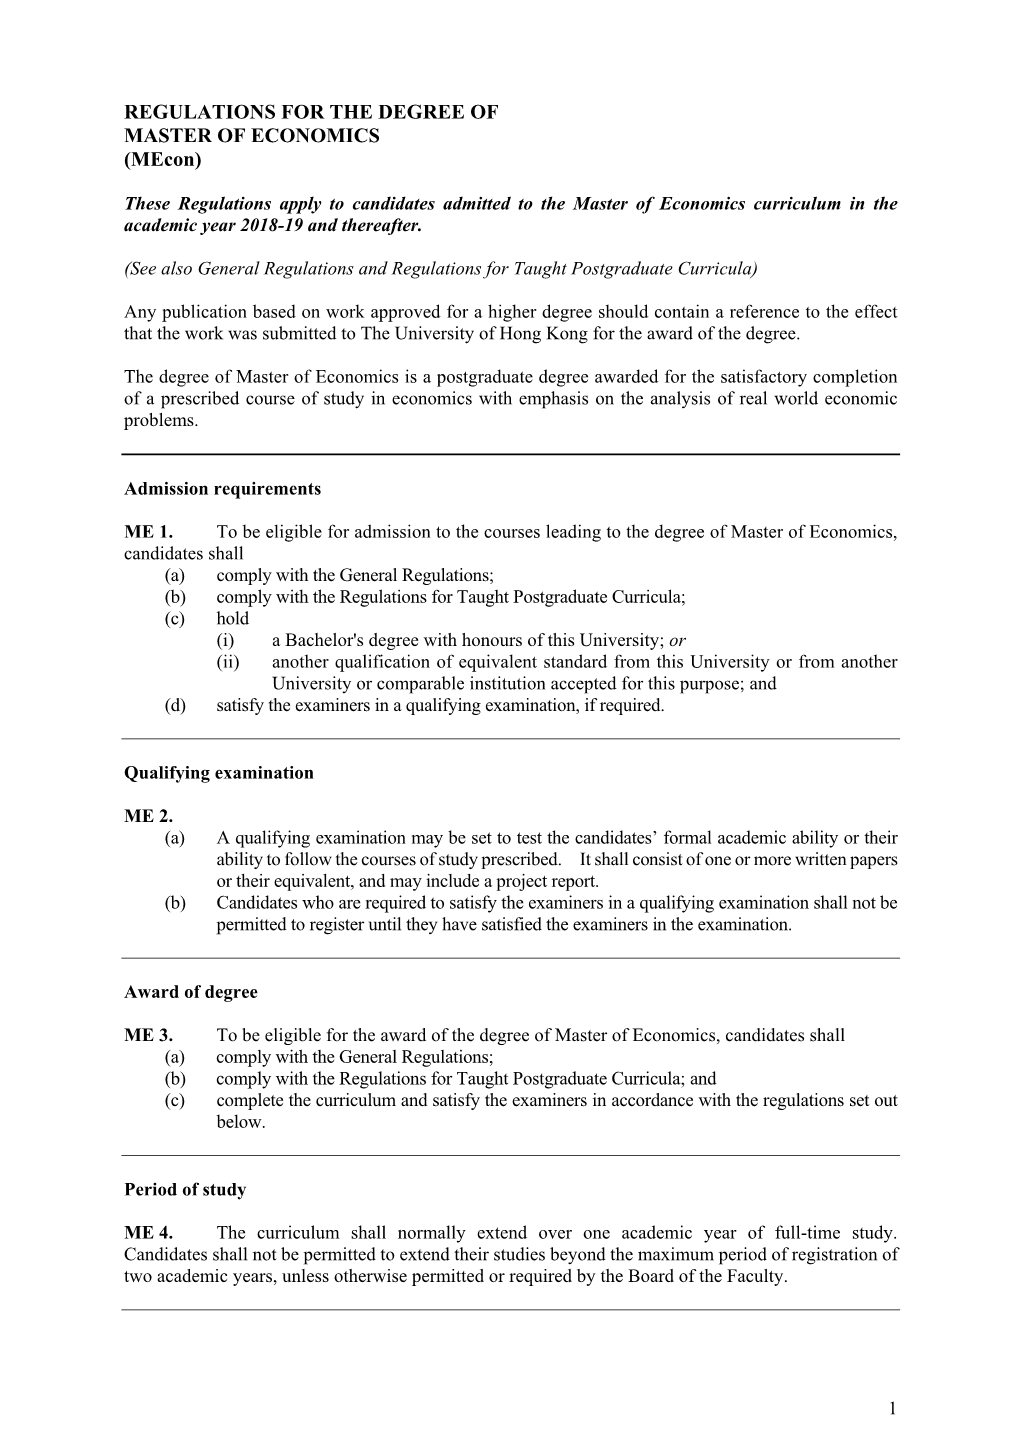 REGULATIONS for the DEGREE of MASTER of ECONOMICS (Mecon)